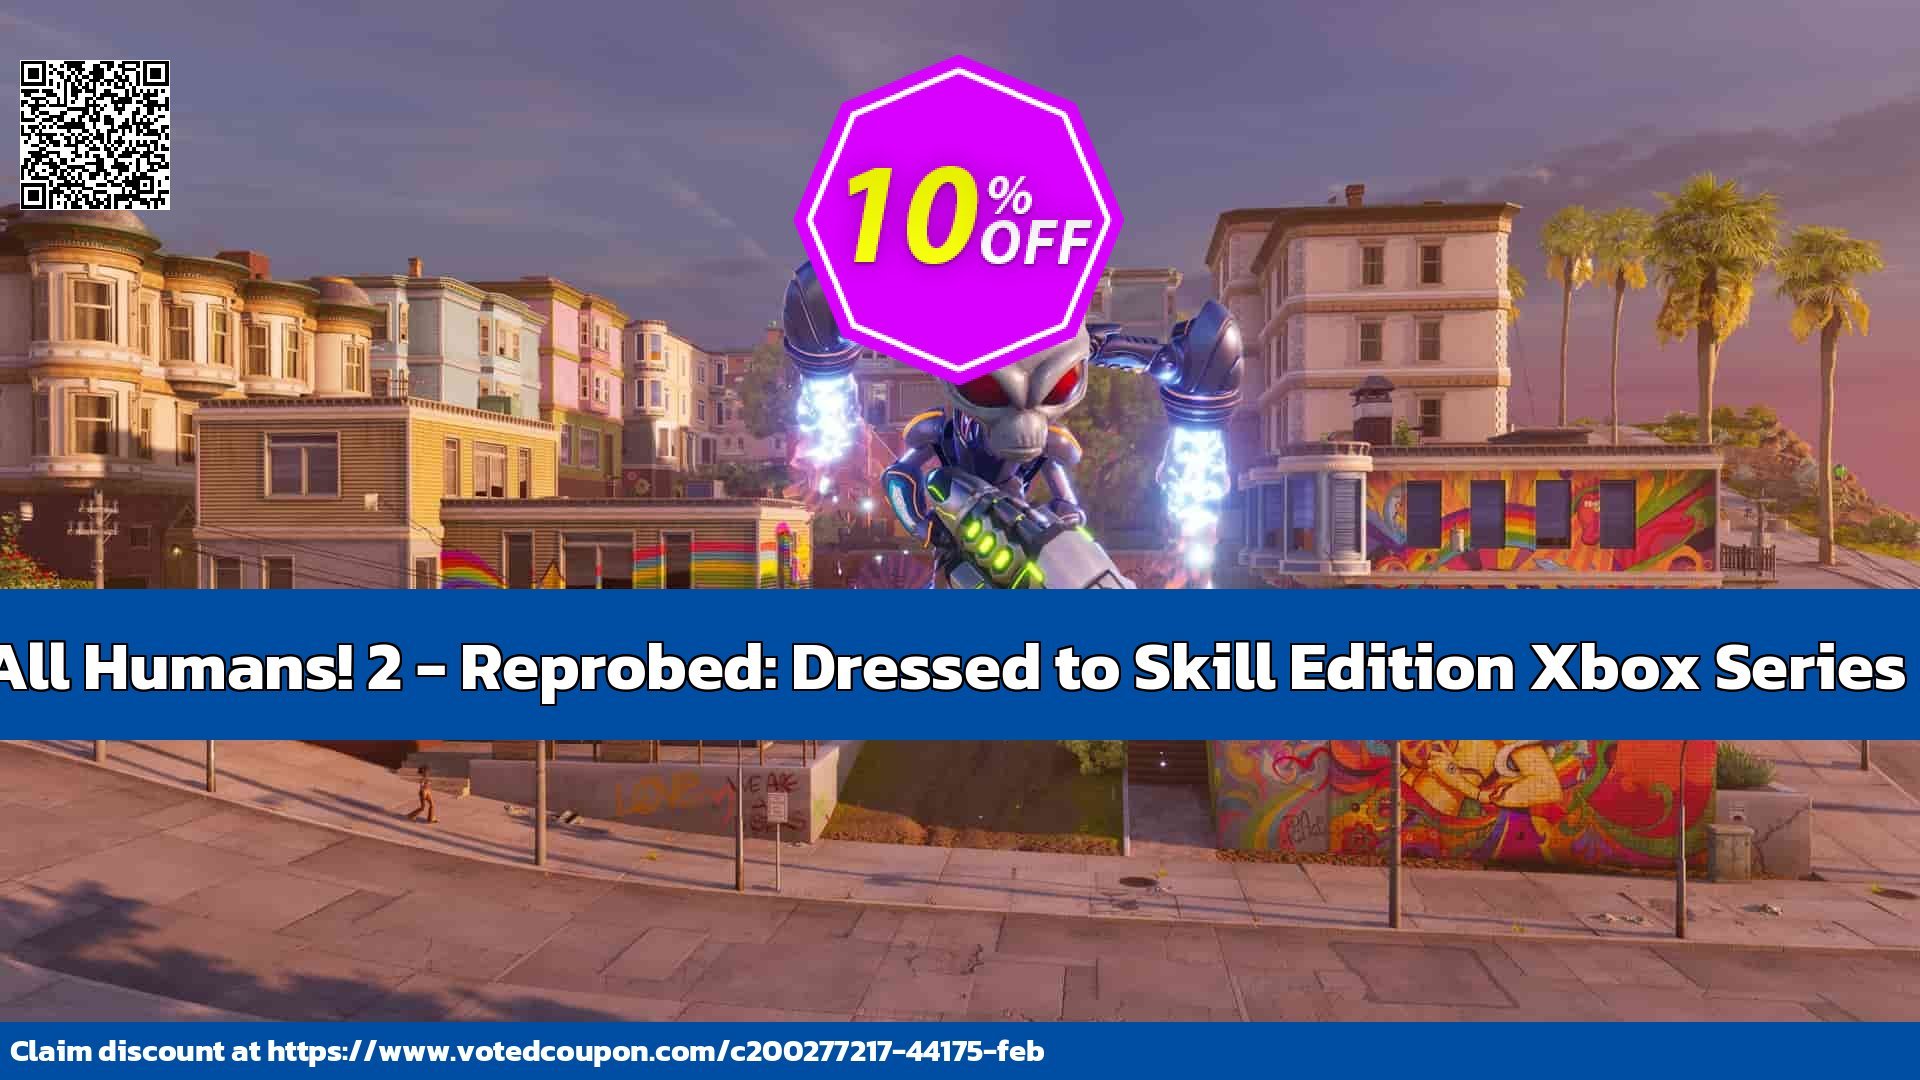 Destroy All Humans! 2 - Reprobed: Dressed to Skill Edition Xbox Series X|S, WW  voted-on promotion codes